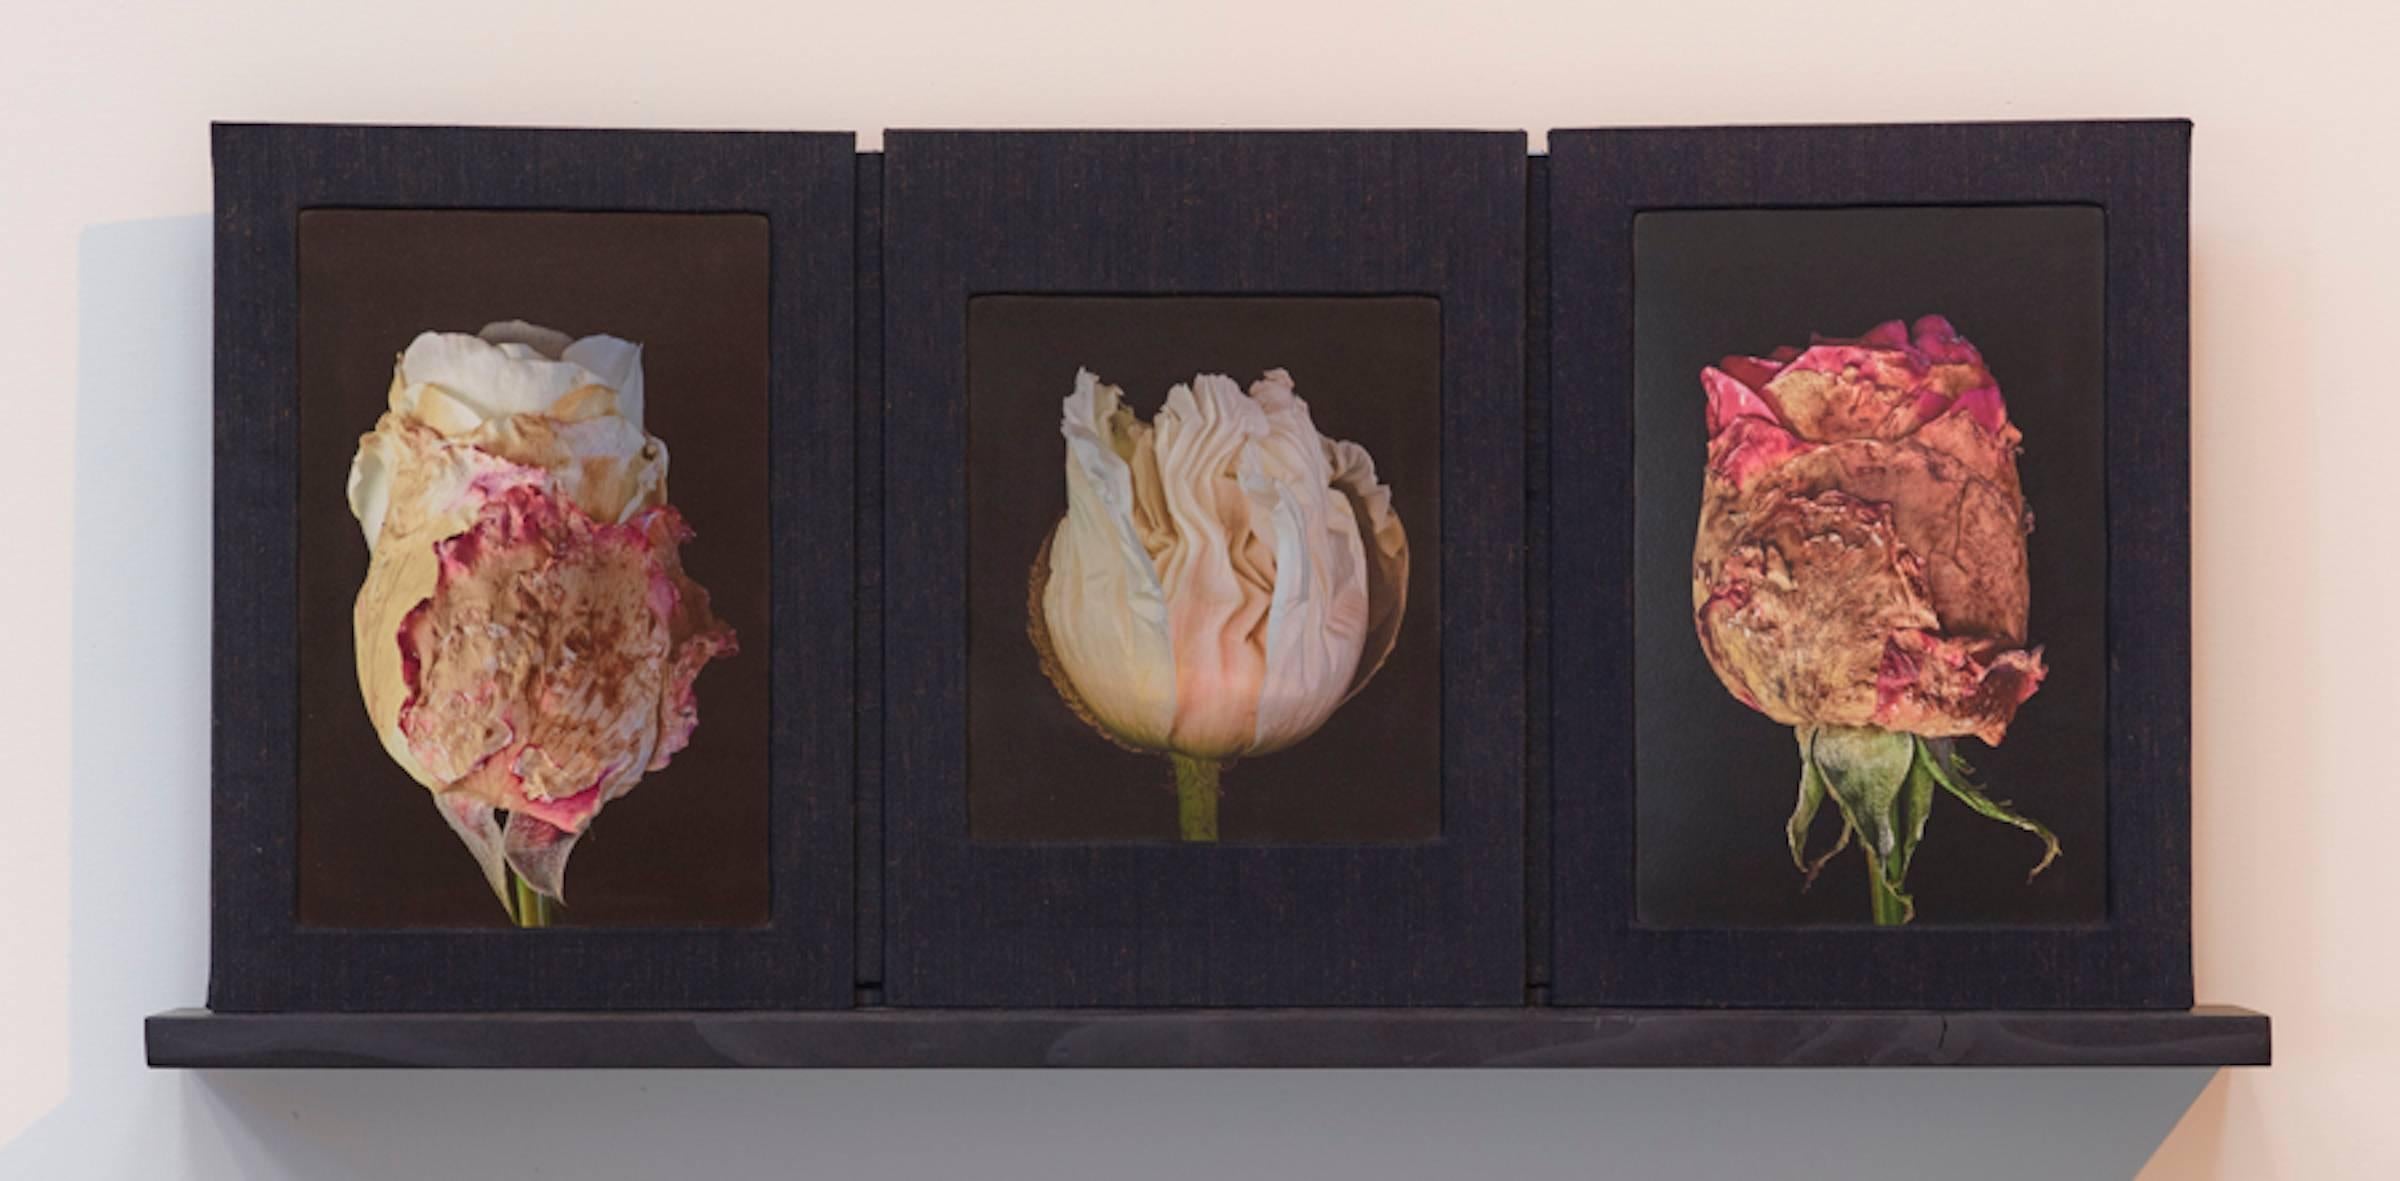 'Budding', a mixed media sculptural photographic triptych book created by hand, in an edition of three, as part of a unique  series. Roger Jordan explores abstractions at the edge of the natural world through a body of work focused on clouds, water,